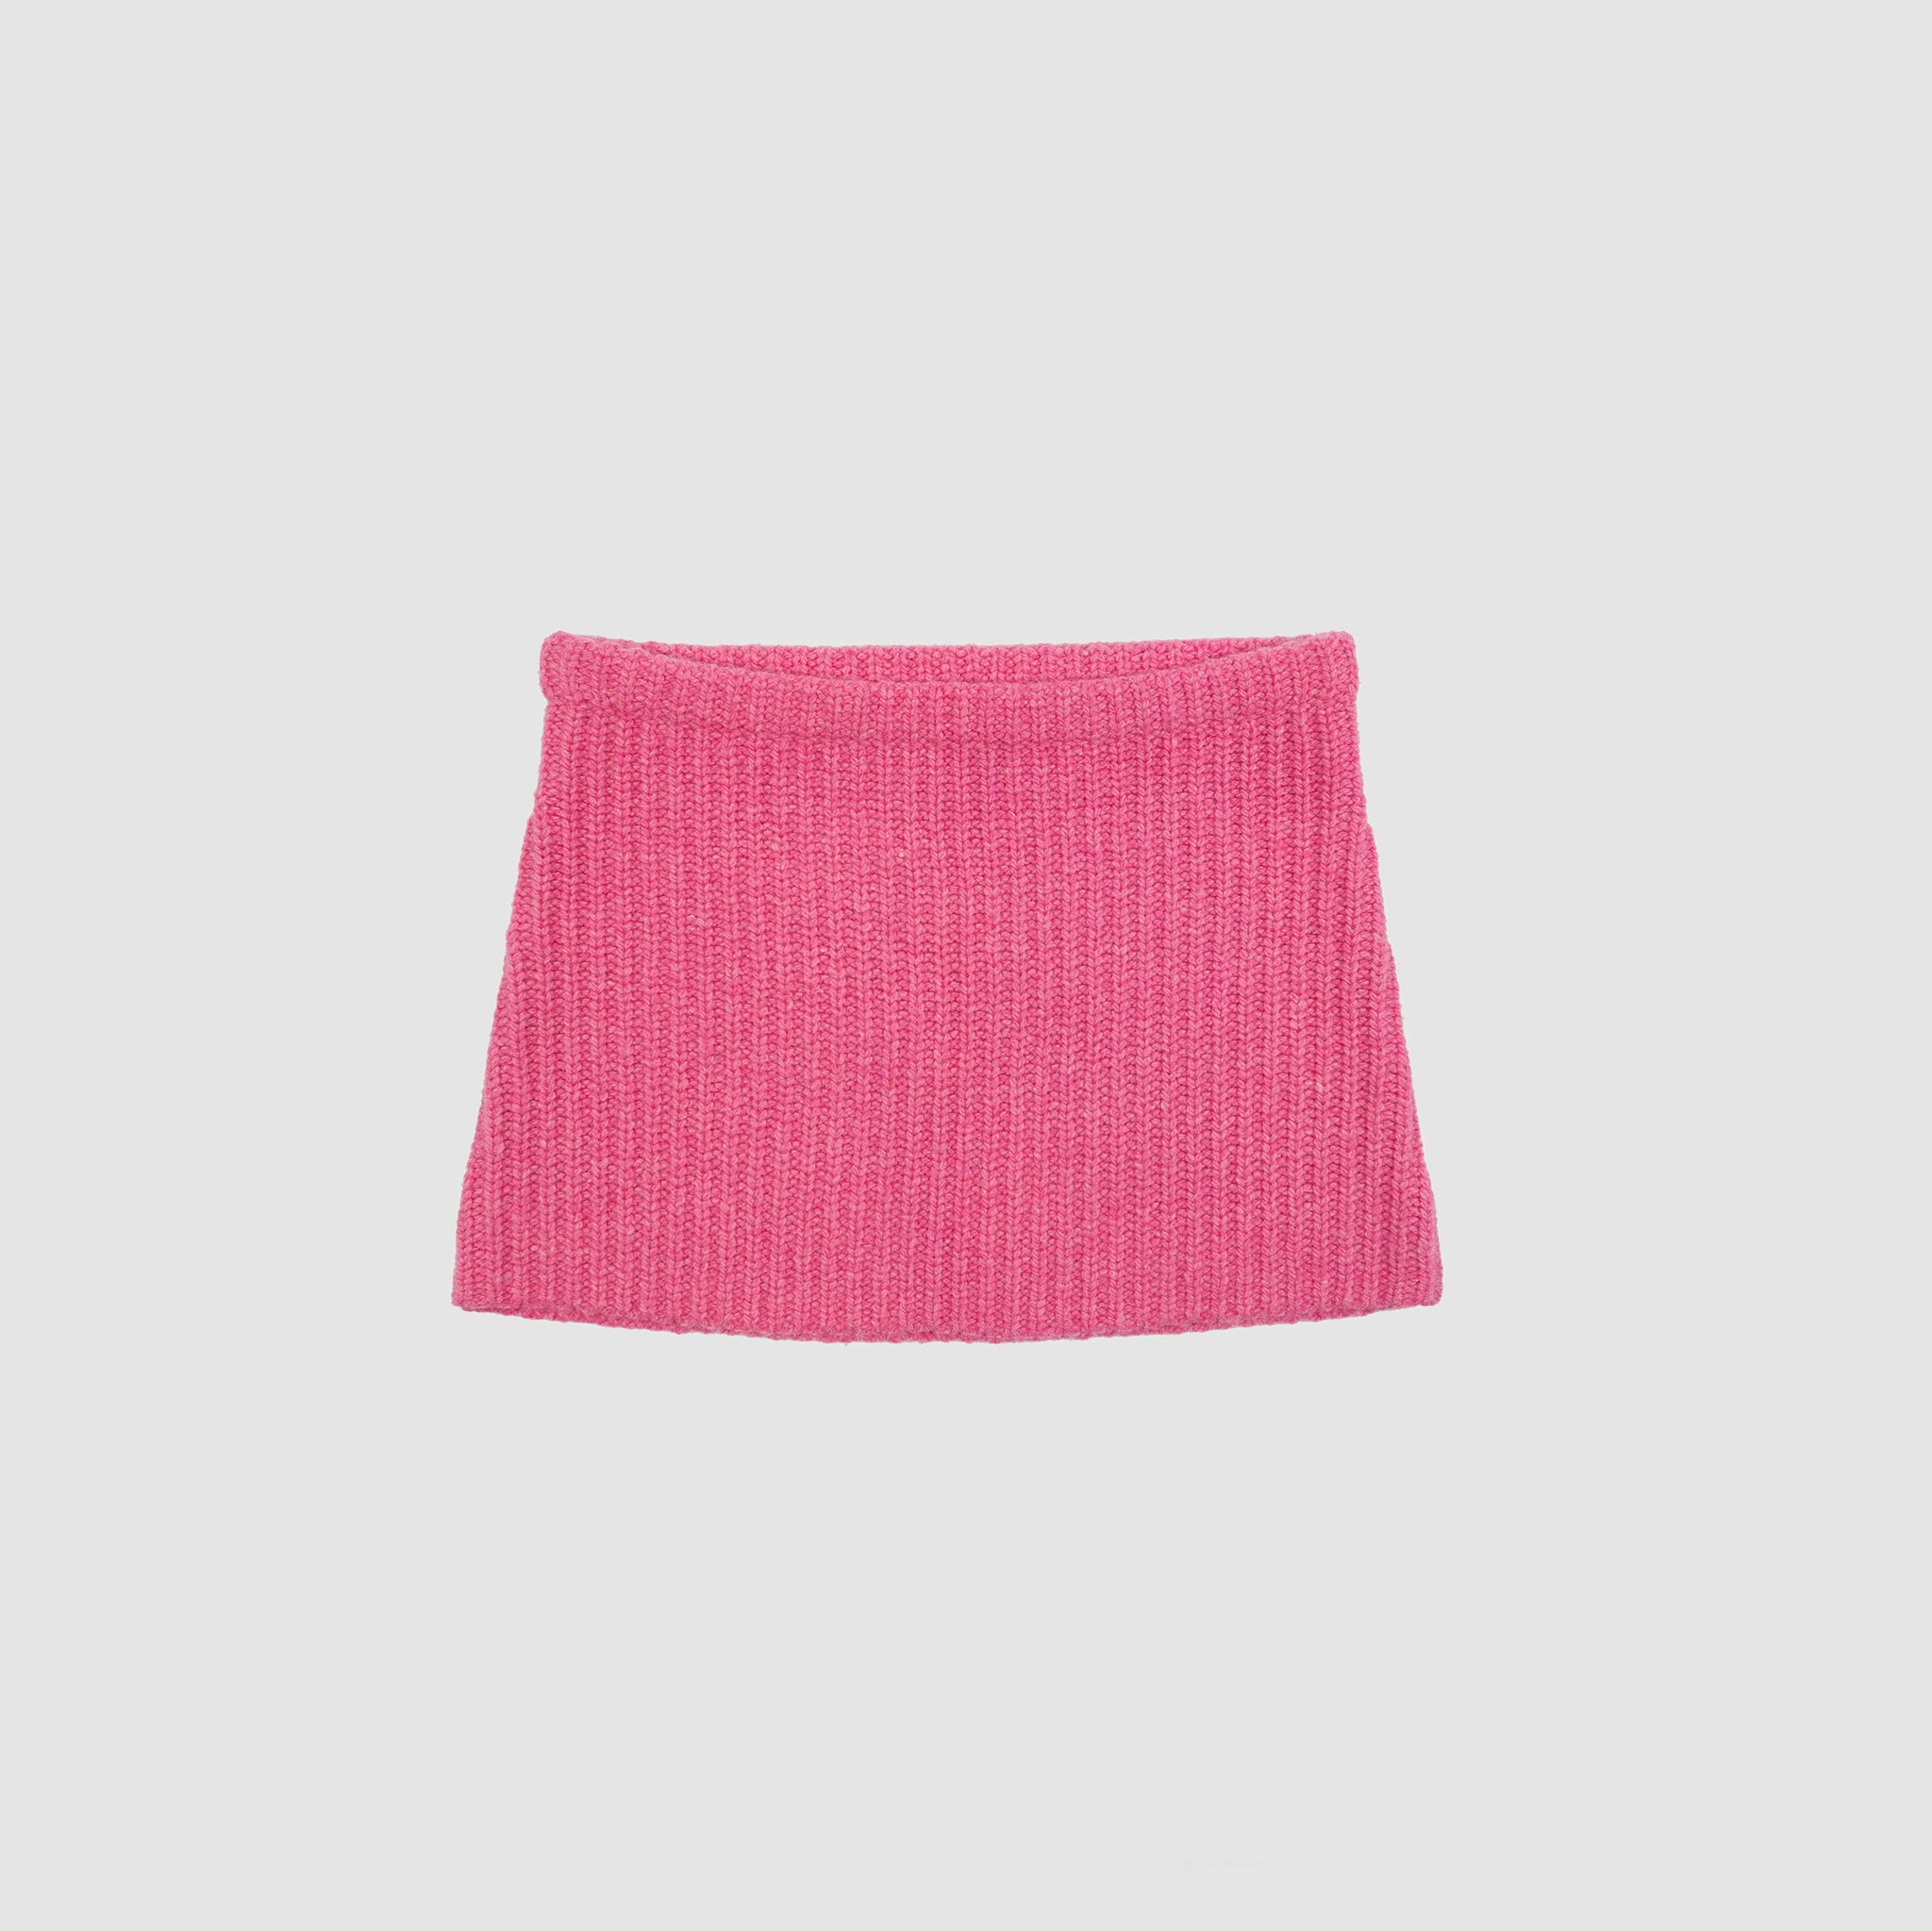 Flat photo of the Barb Skirt - Carnation. The skirt is a pink mini knit skirt.